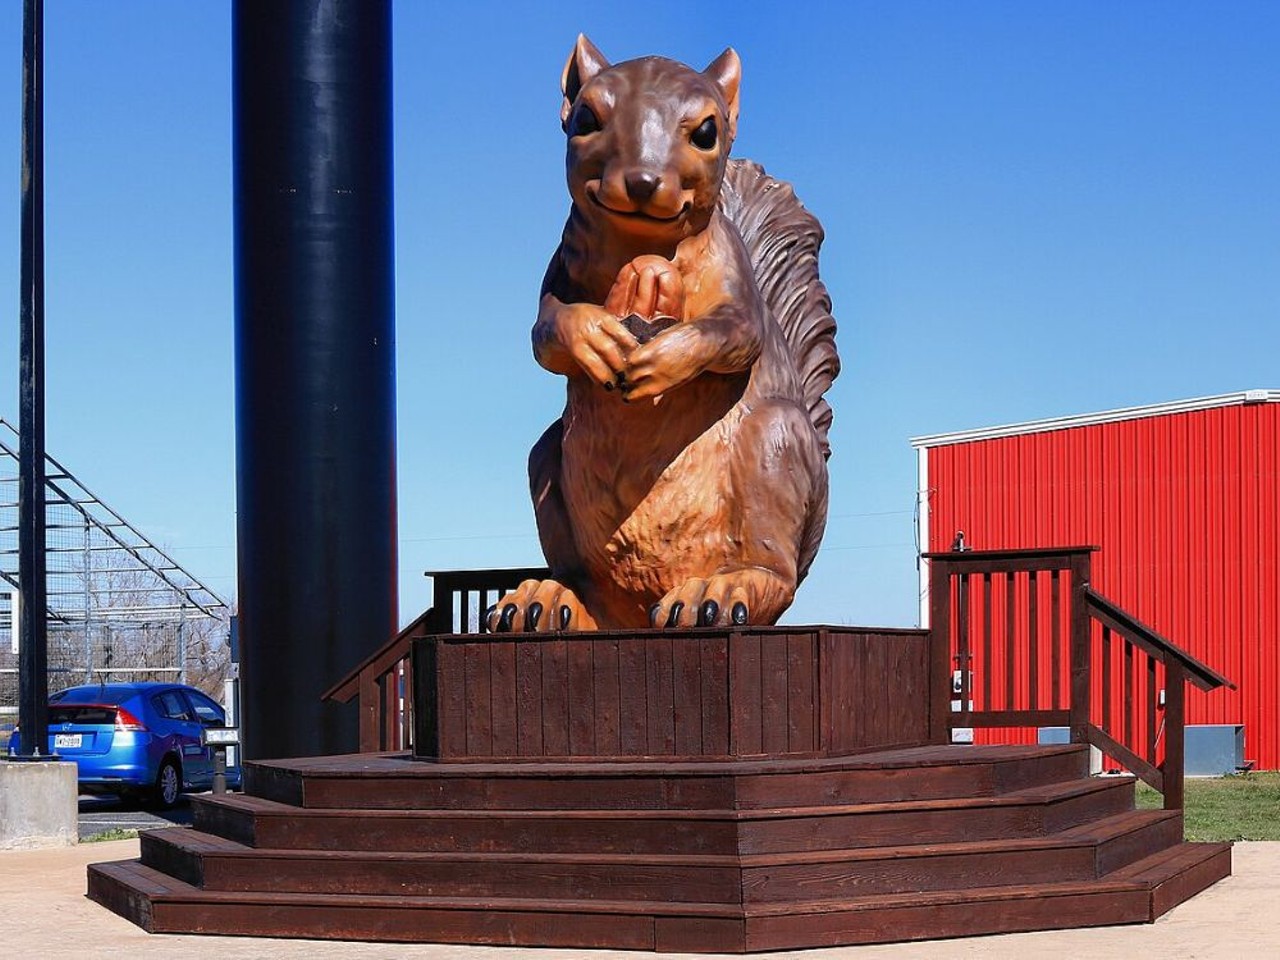 Ms. Pearl the Giant Squirrel
2626 State Highway 71, Cedar Creek
Berdoll Pecan Candy in Cedar Creek pays honor to its mascot, Ms. Pearl, with a 14-foot statue in front of the store, which they claim is the tallest squirrel statue in the world.